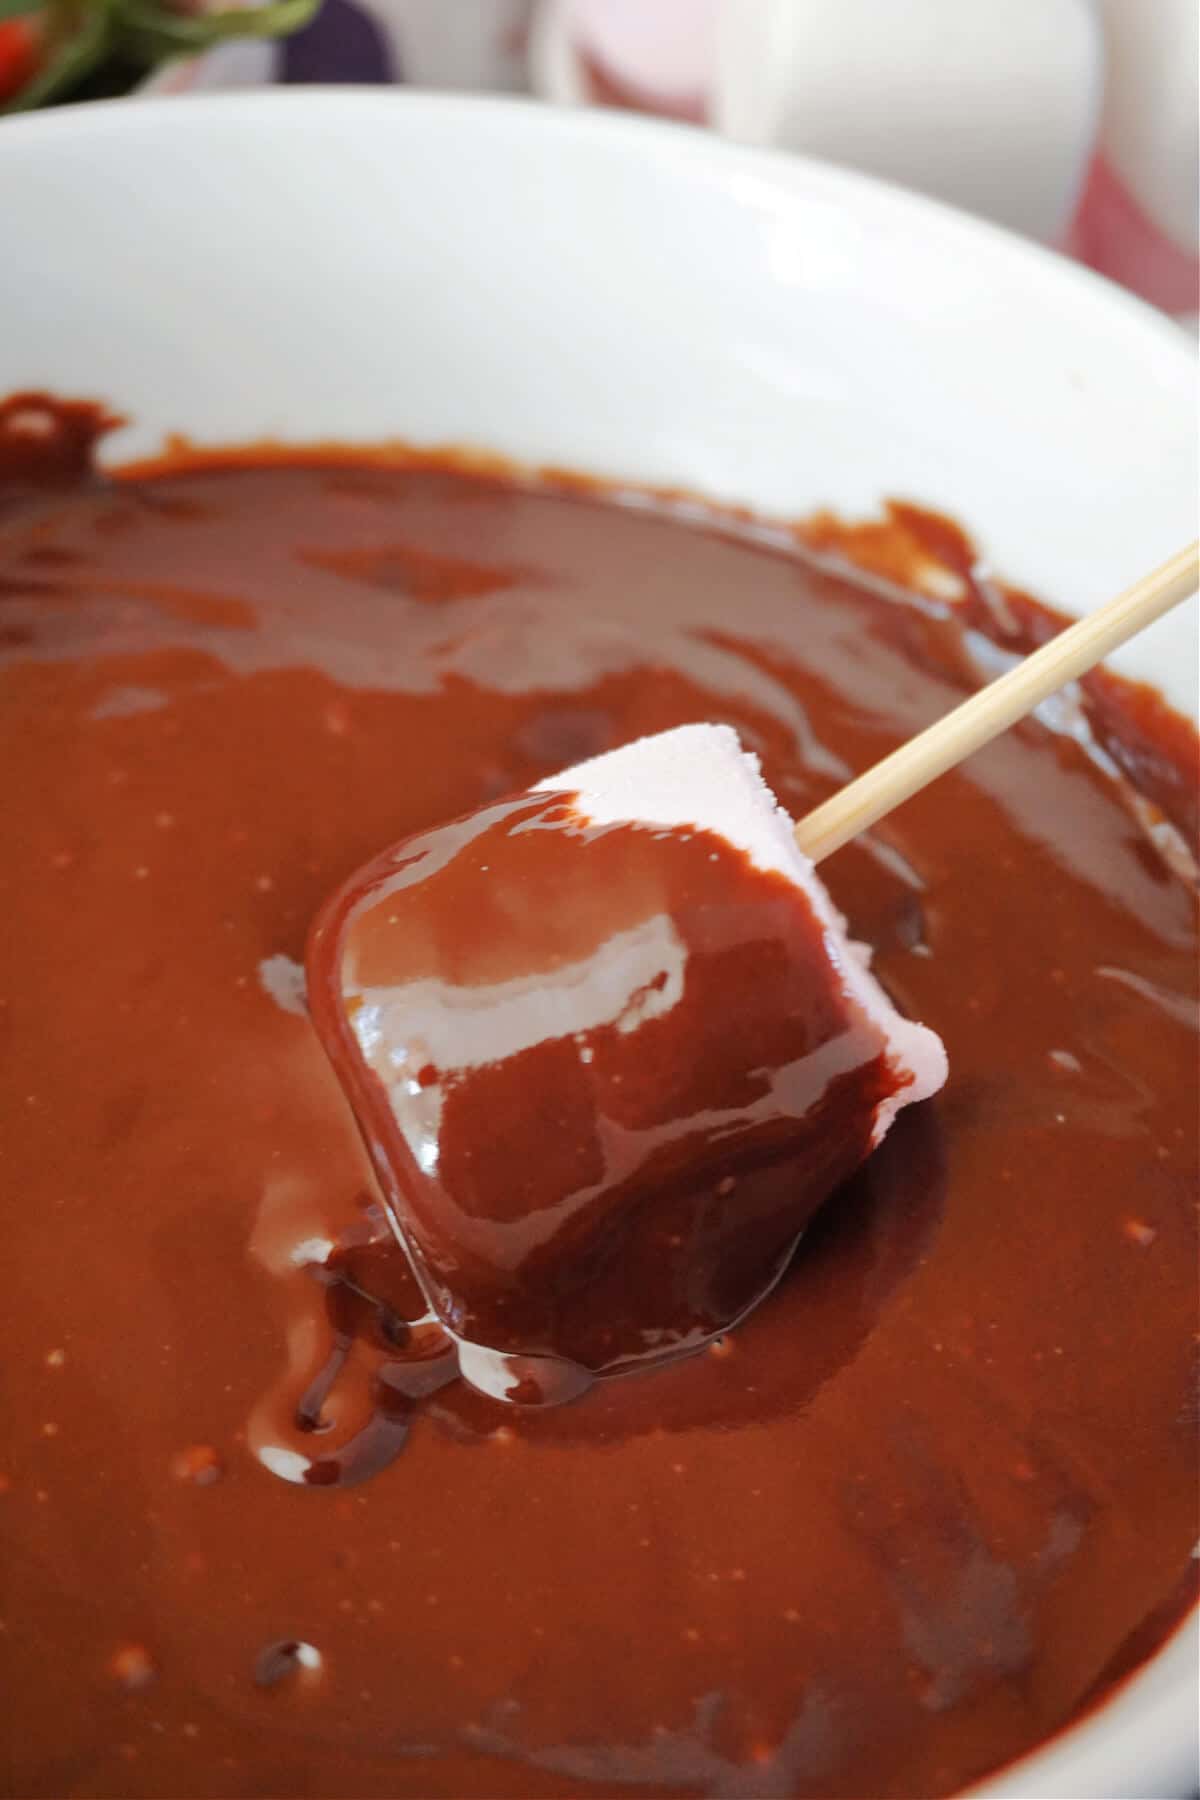 A marshmallow dipped into a bowl of chocolate sauce.